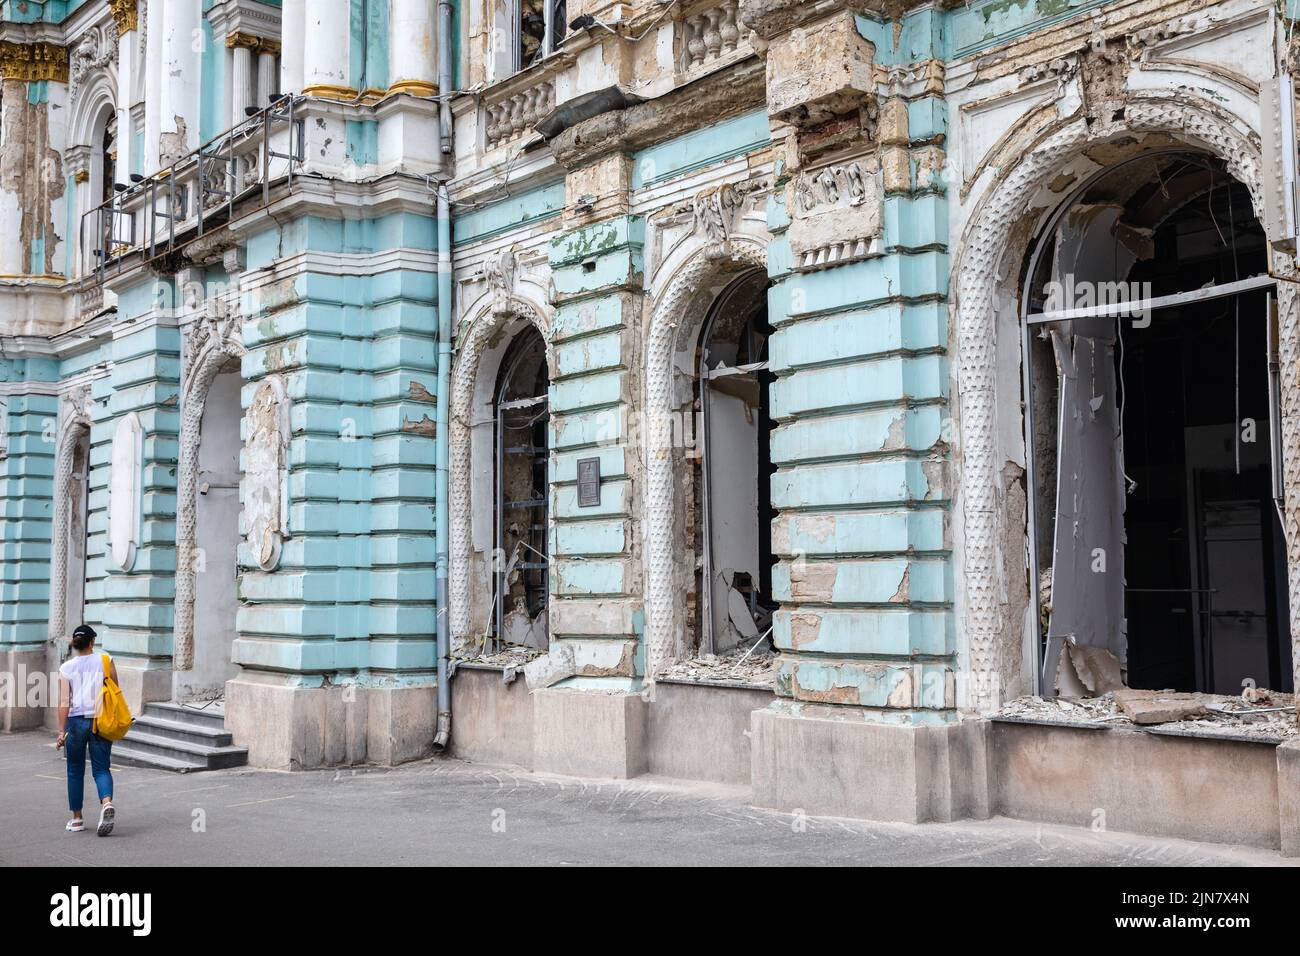 A young woman walks past a damaged building with broken windows and a damaged facade of the building due to Russian shelling in Kharkiv. Stock Photo